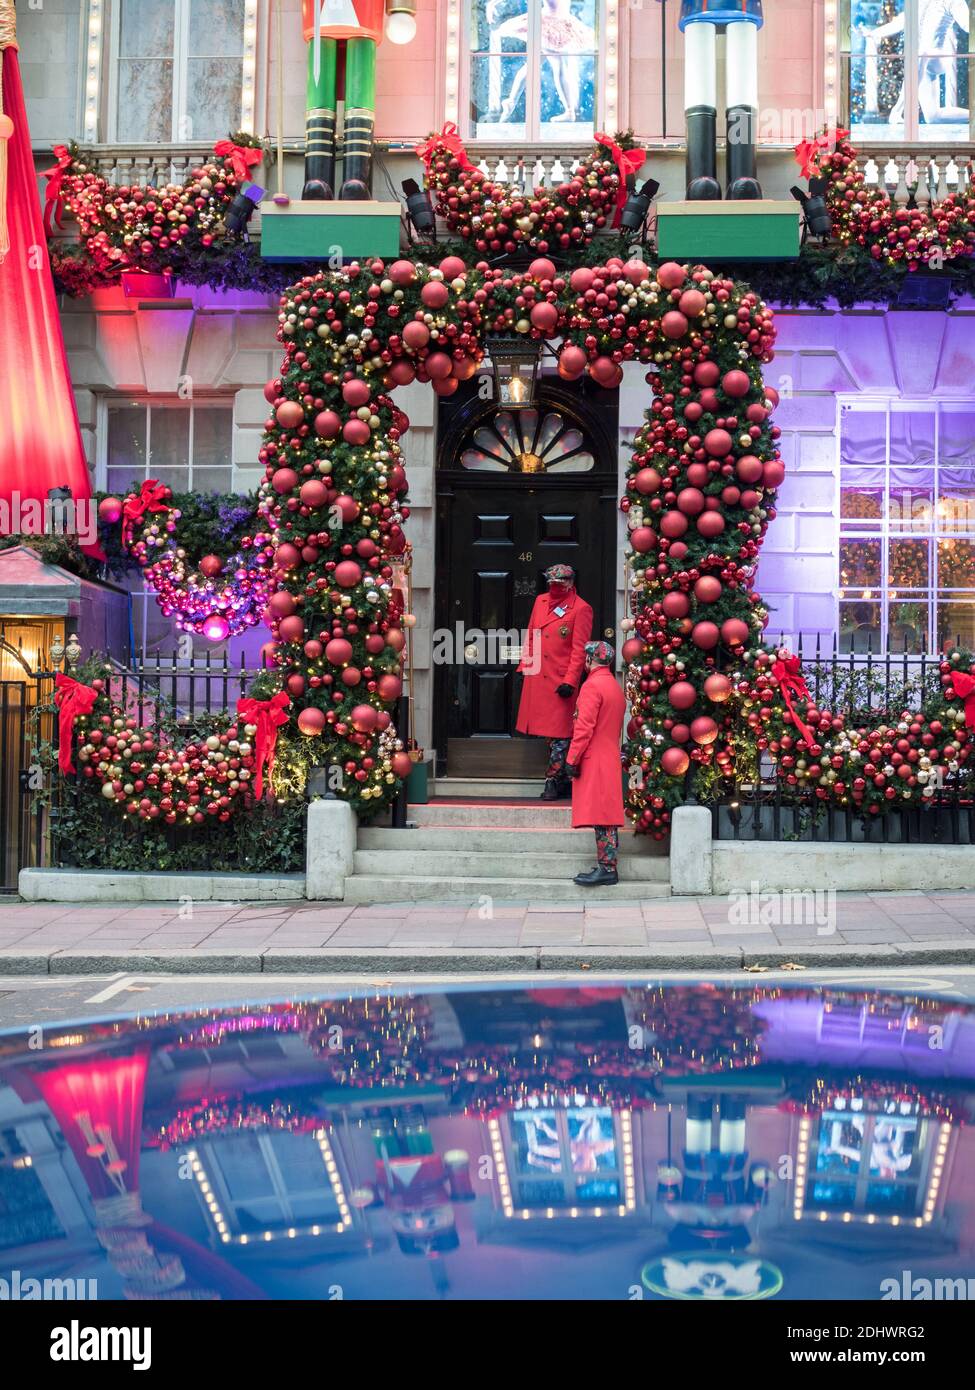 London, Greater London, England - 10 Dec 2020: Festive facade of Annabels private club in Berkeley Square, Mayfair. Stock Photo